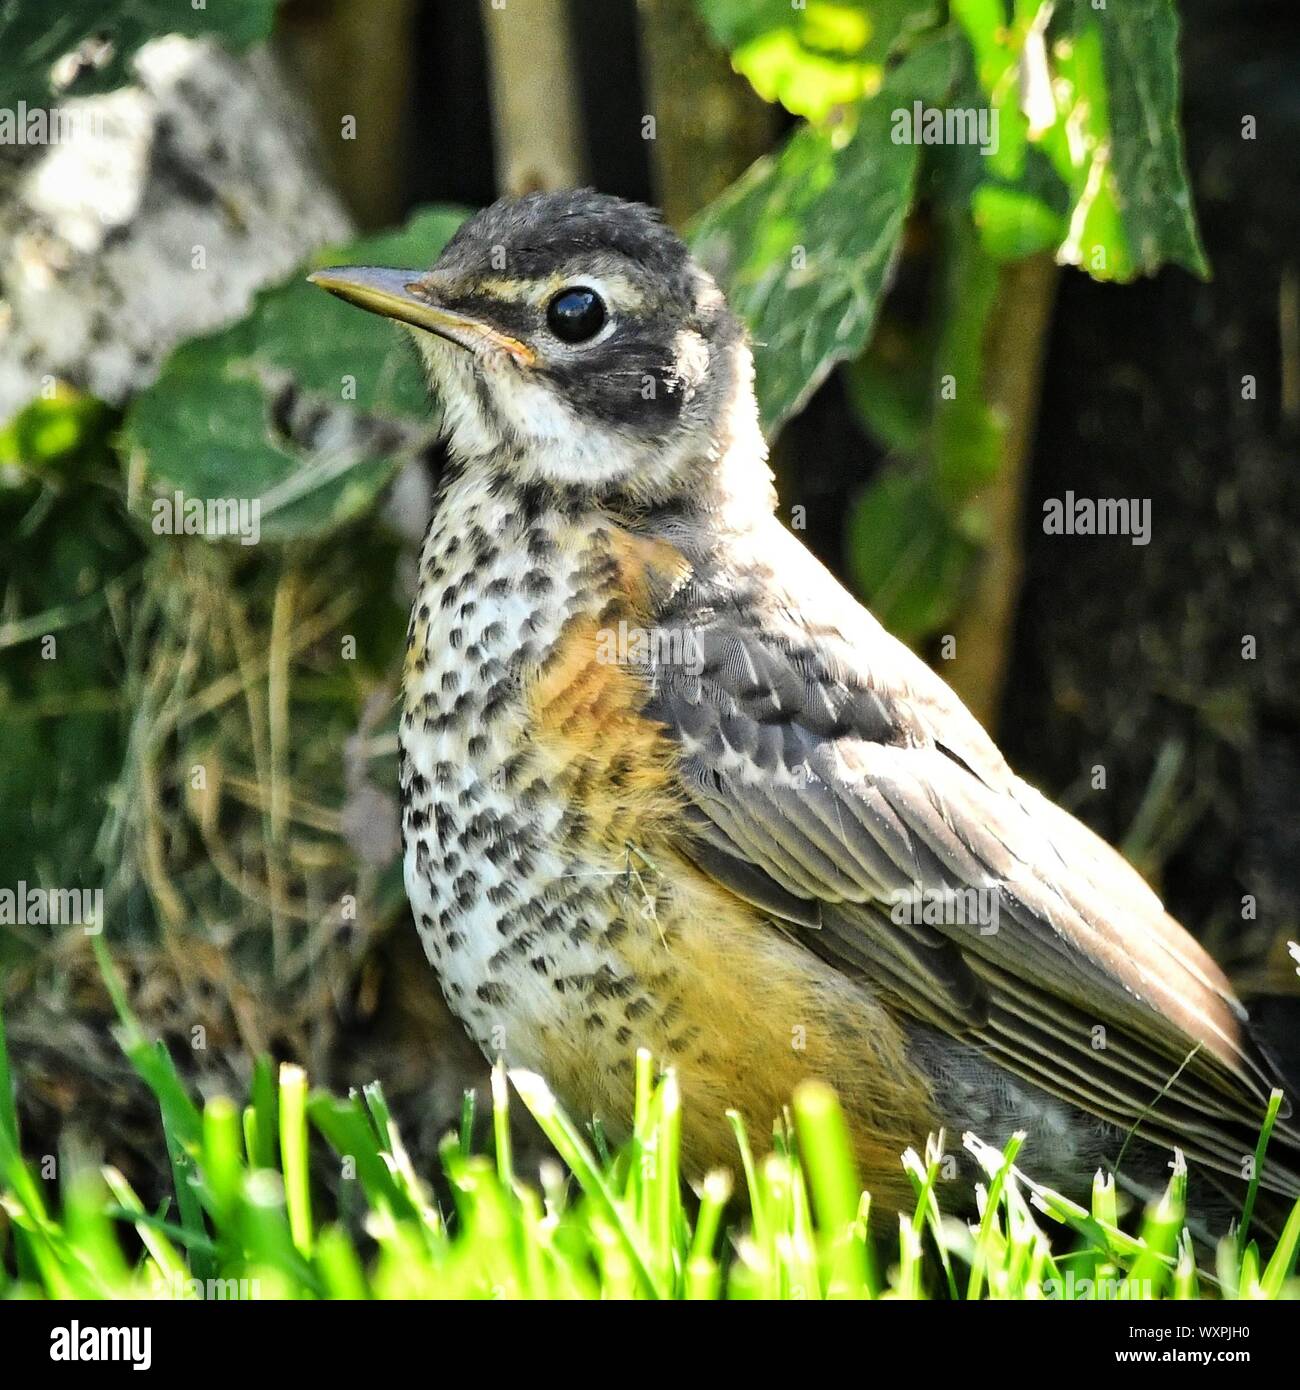 Portrait of a newly fledged robin sitting on the grass, Colorado, United States Stock Photo